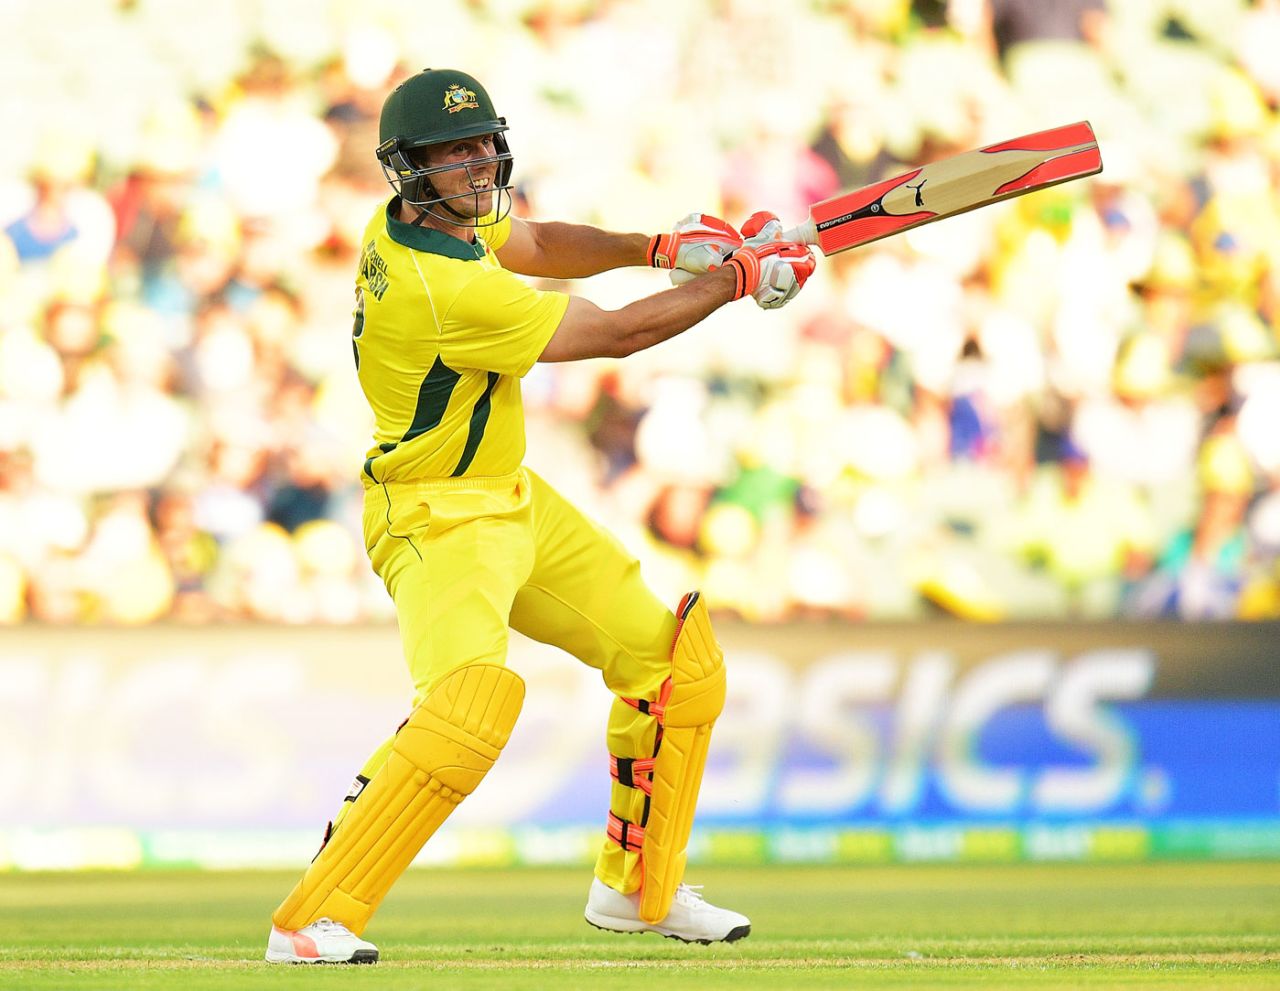 Mitchell Marsh clubbed quick runs to bring down the target, Australia v England, 4th ODI, Adelaide, January 26, 2018